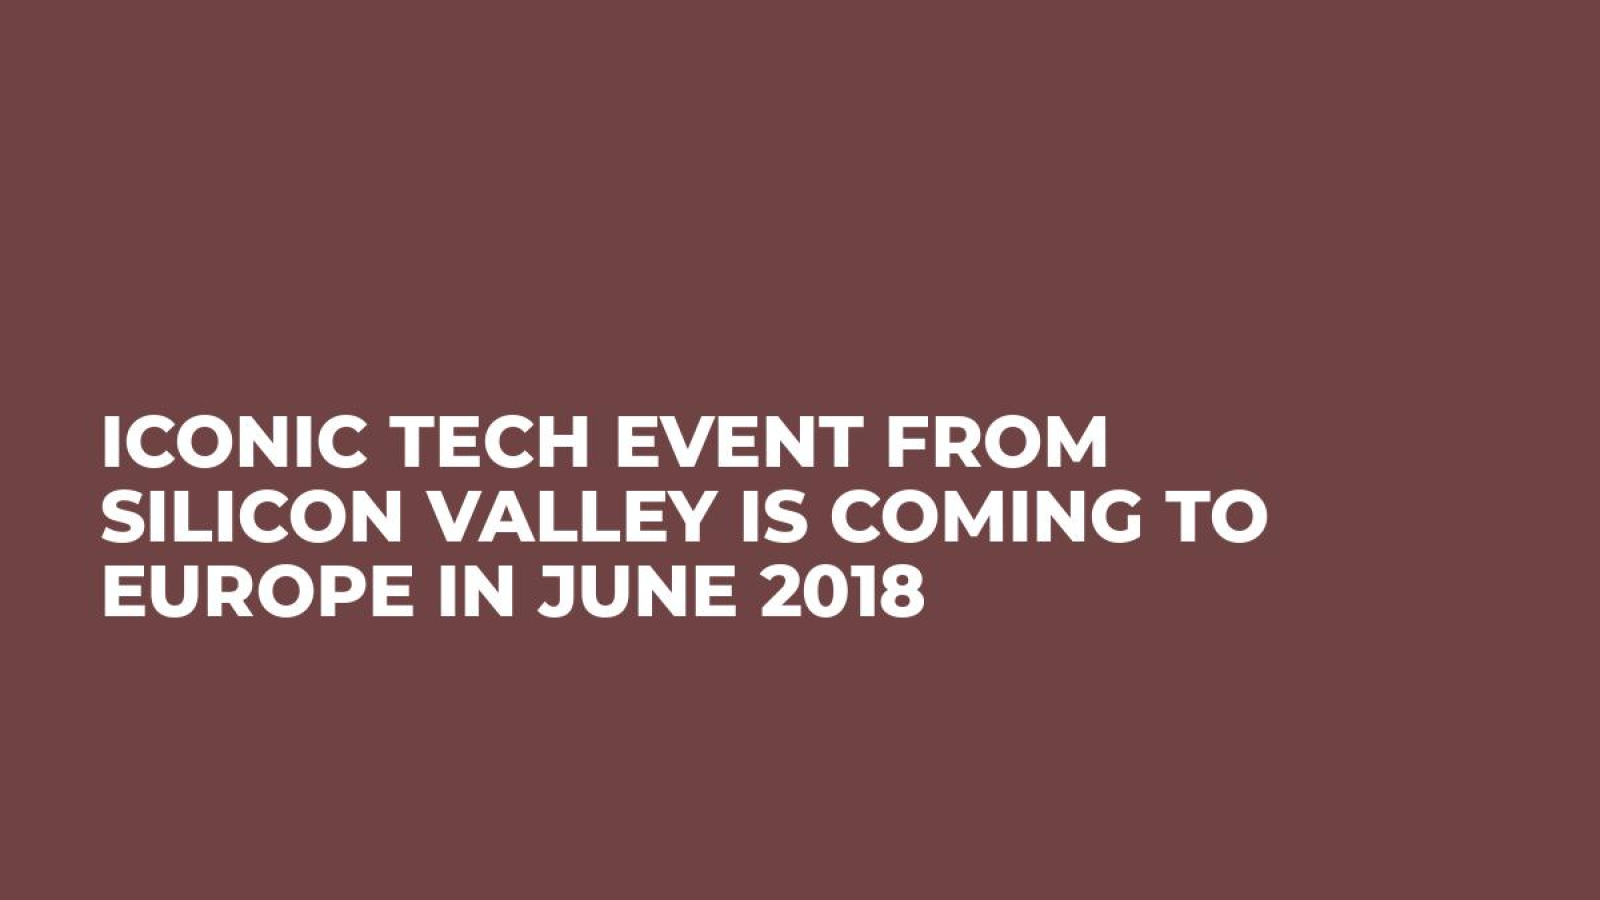 Iconic Tech Event from Silicon Valley is Coming to Europe in June 2018